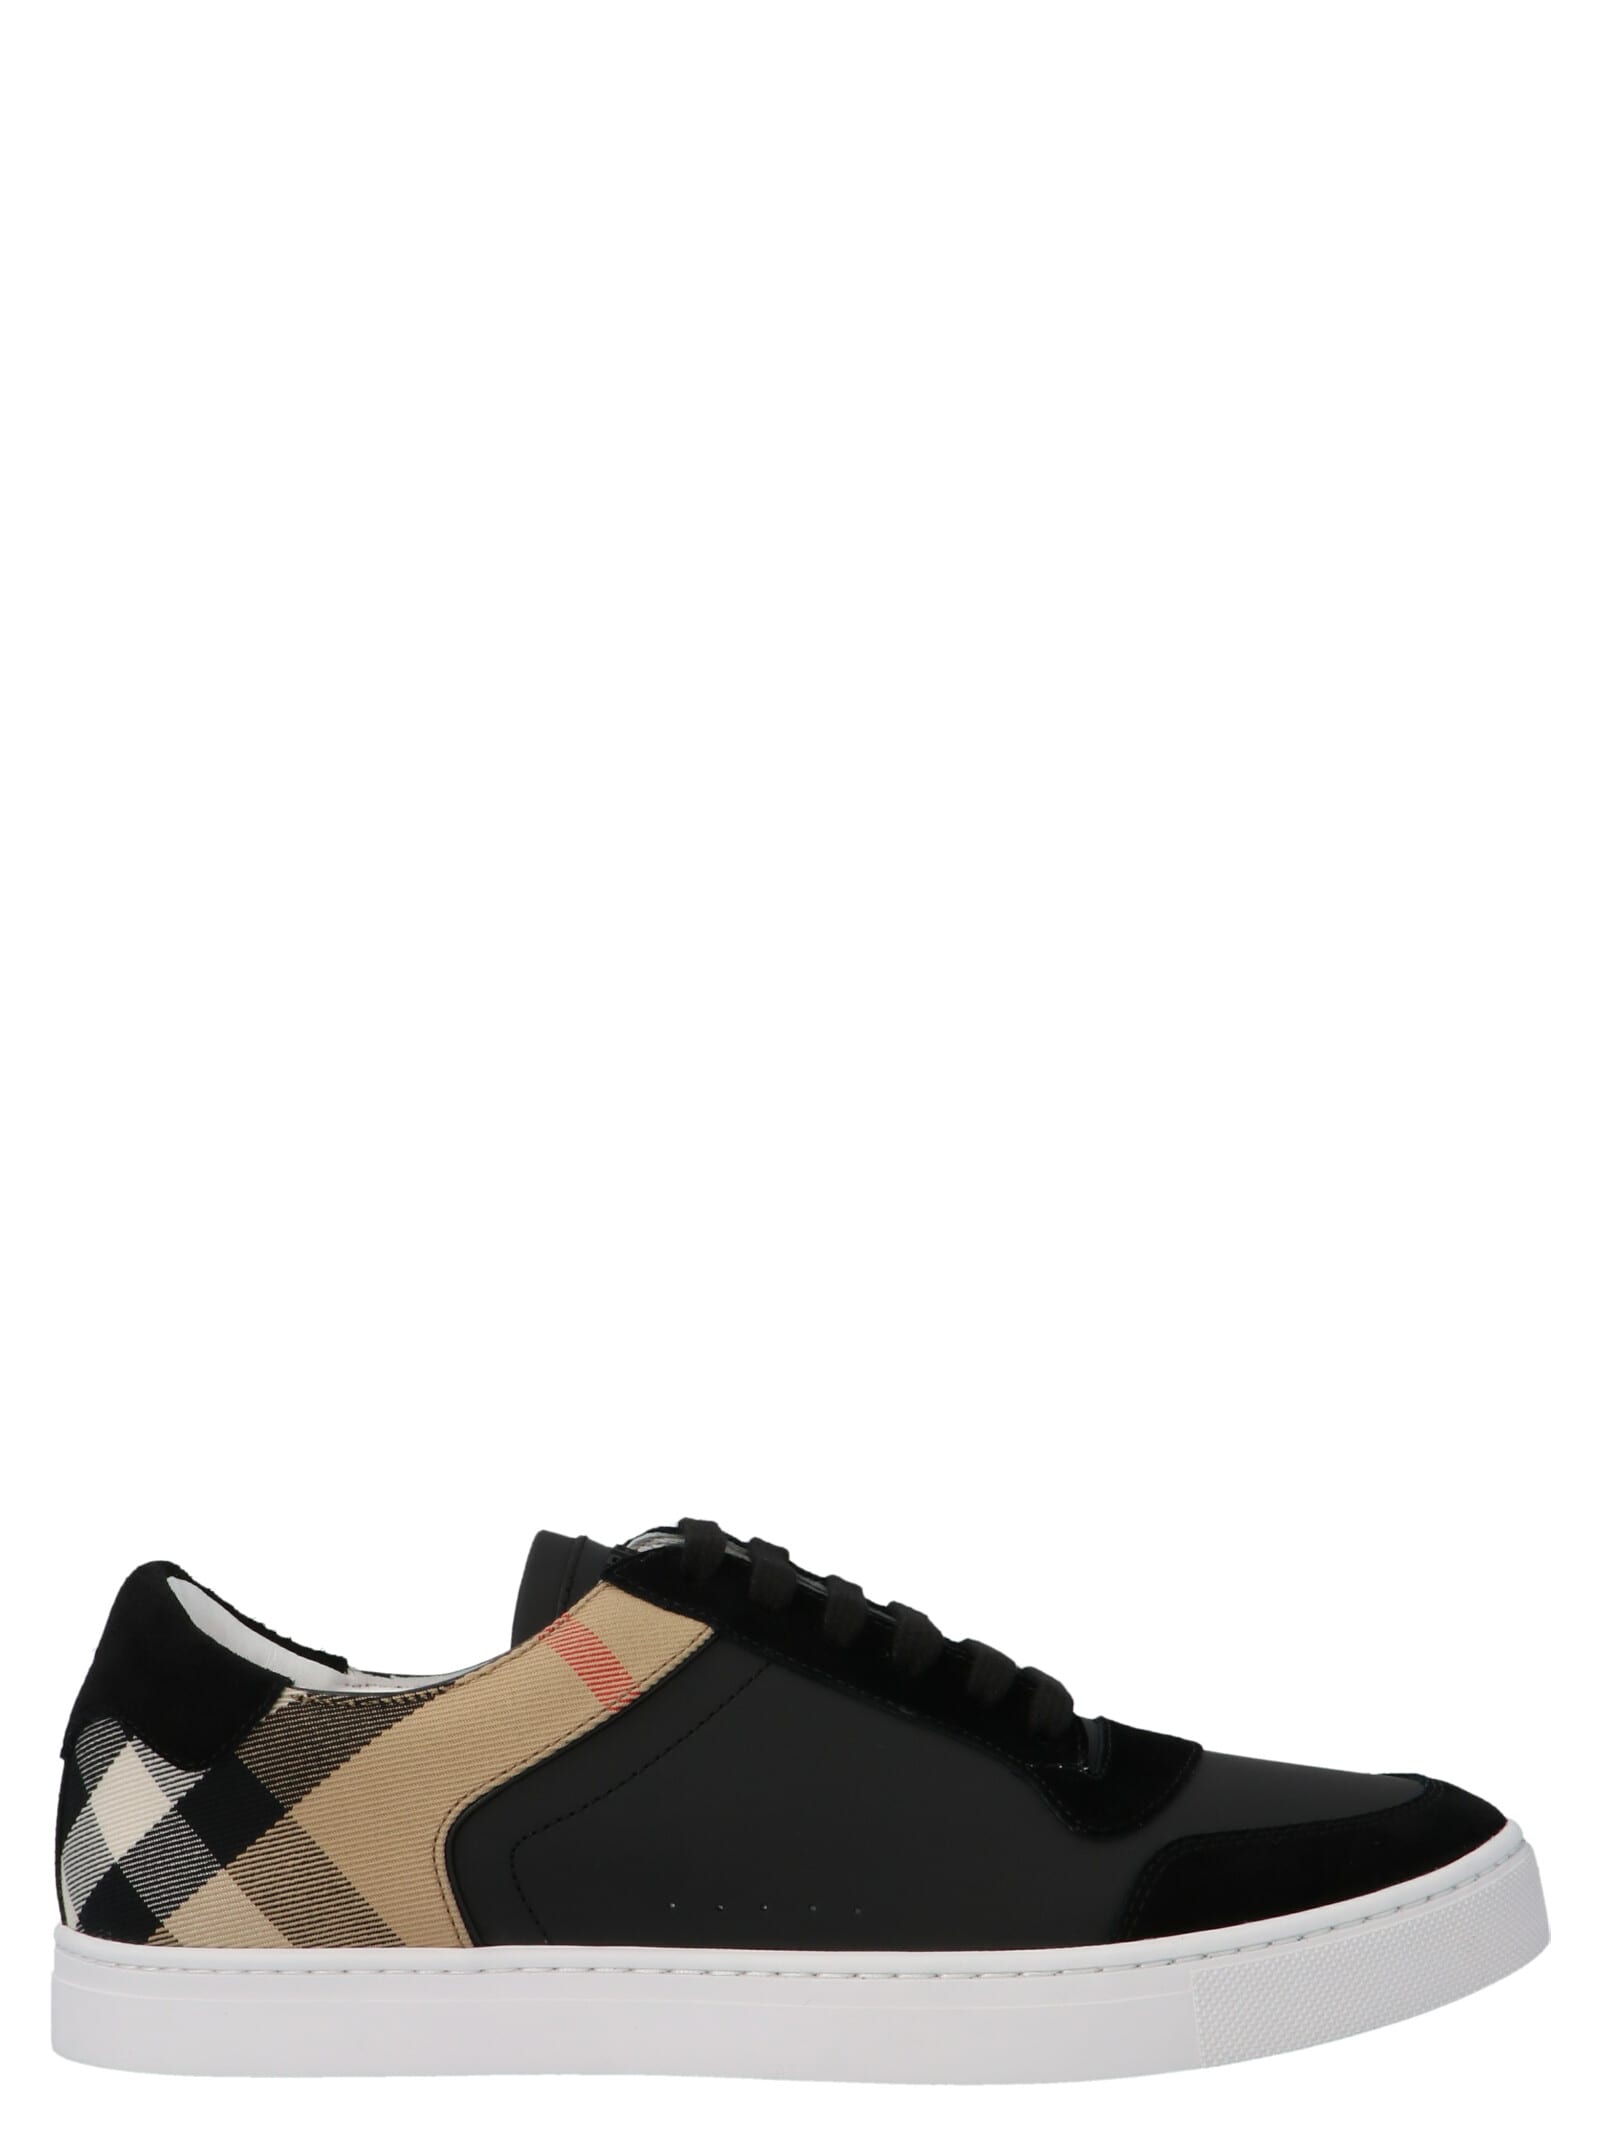 BURBERRY NEW REETH SNEAKERS